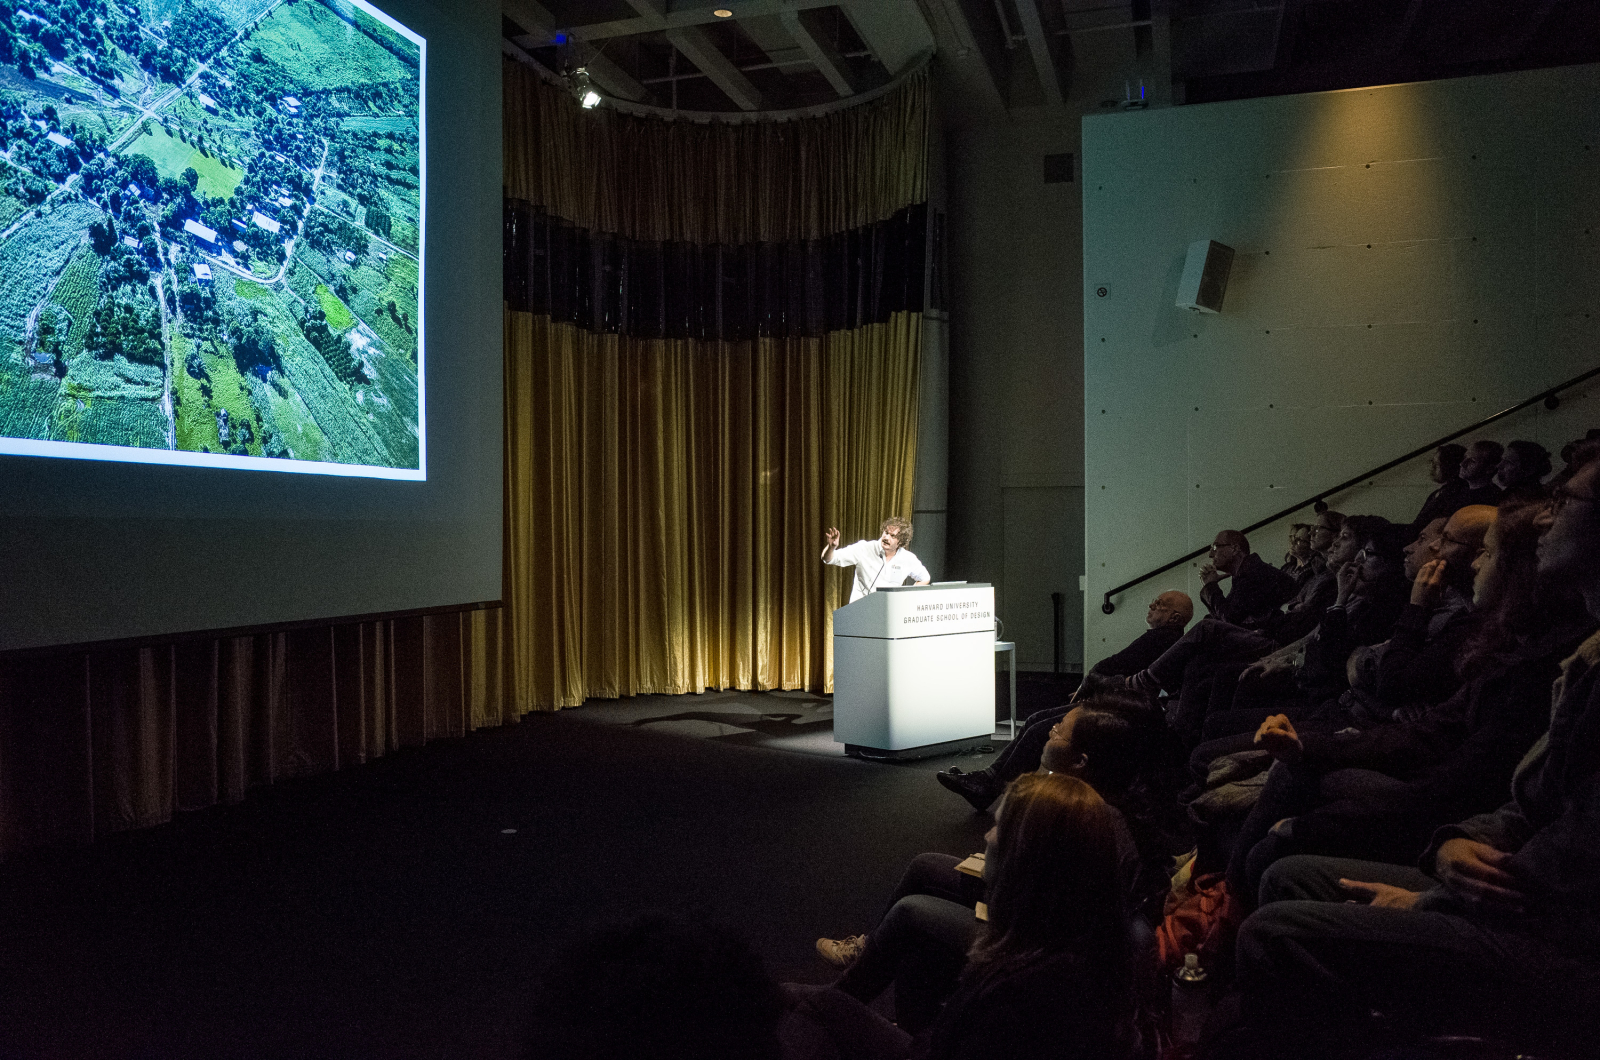 Wheelwright Prize Lecture: Jose Ahedo, “Domesticated Grounds”